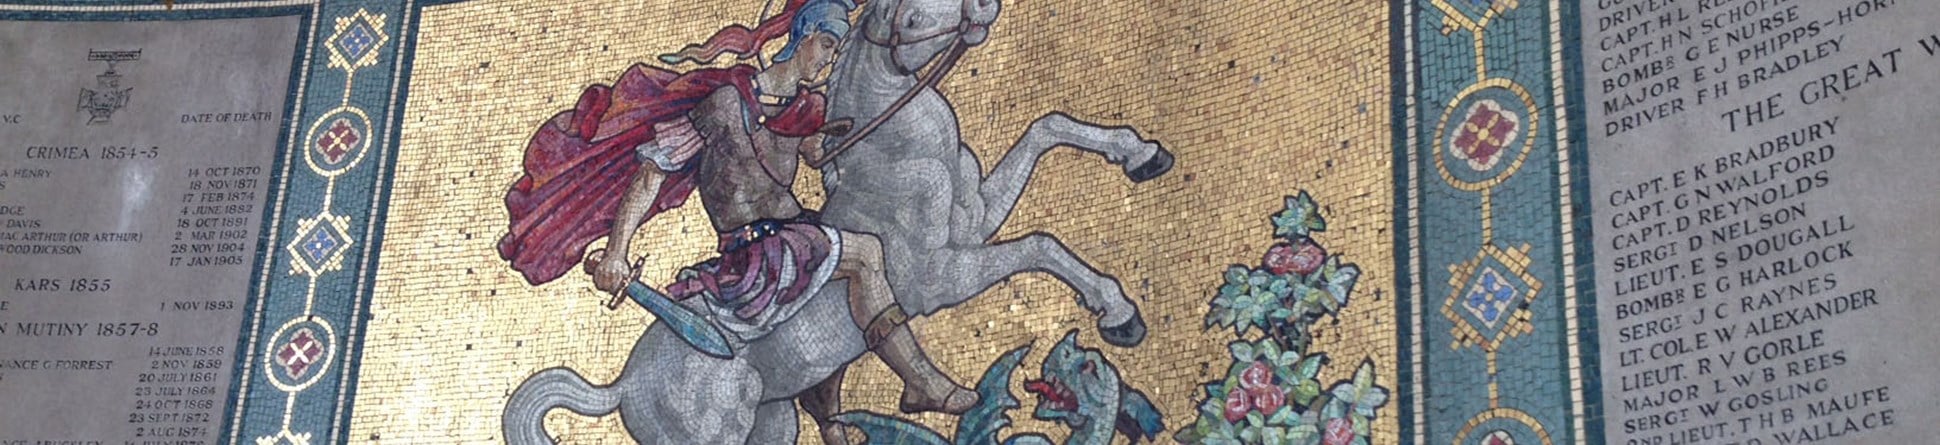 Mosaic of St George on a white horse slaying a dragon